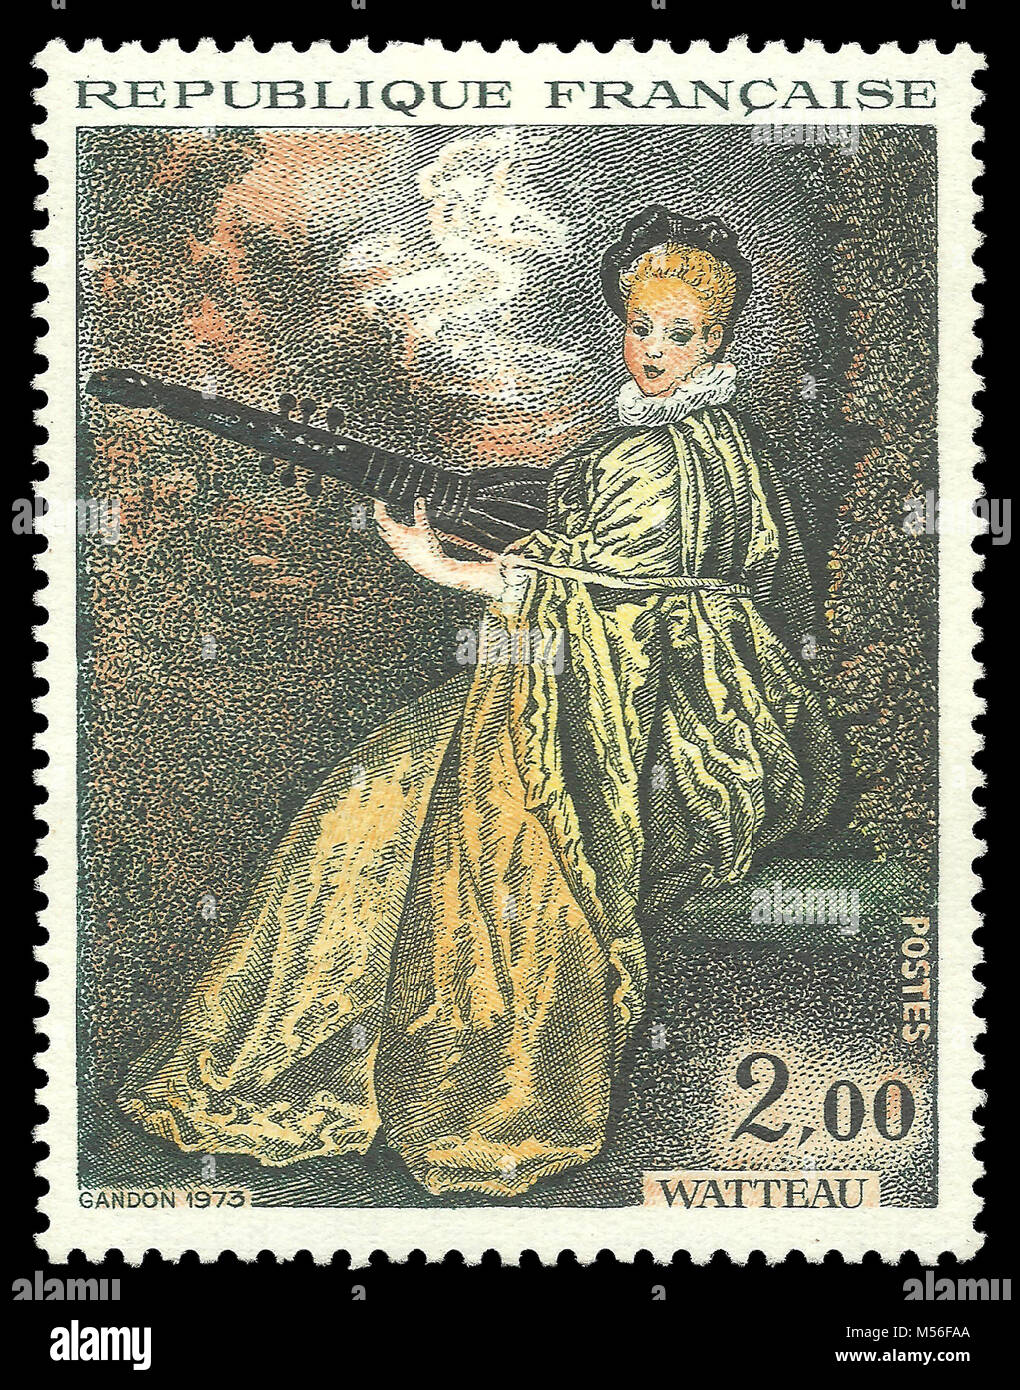 France - stamp 1973: Color edition on Art, shows Painting La Finette by Watteau Stock Photo